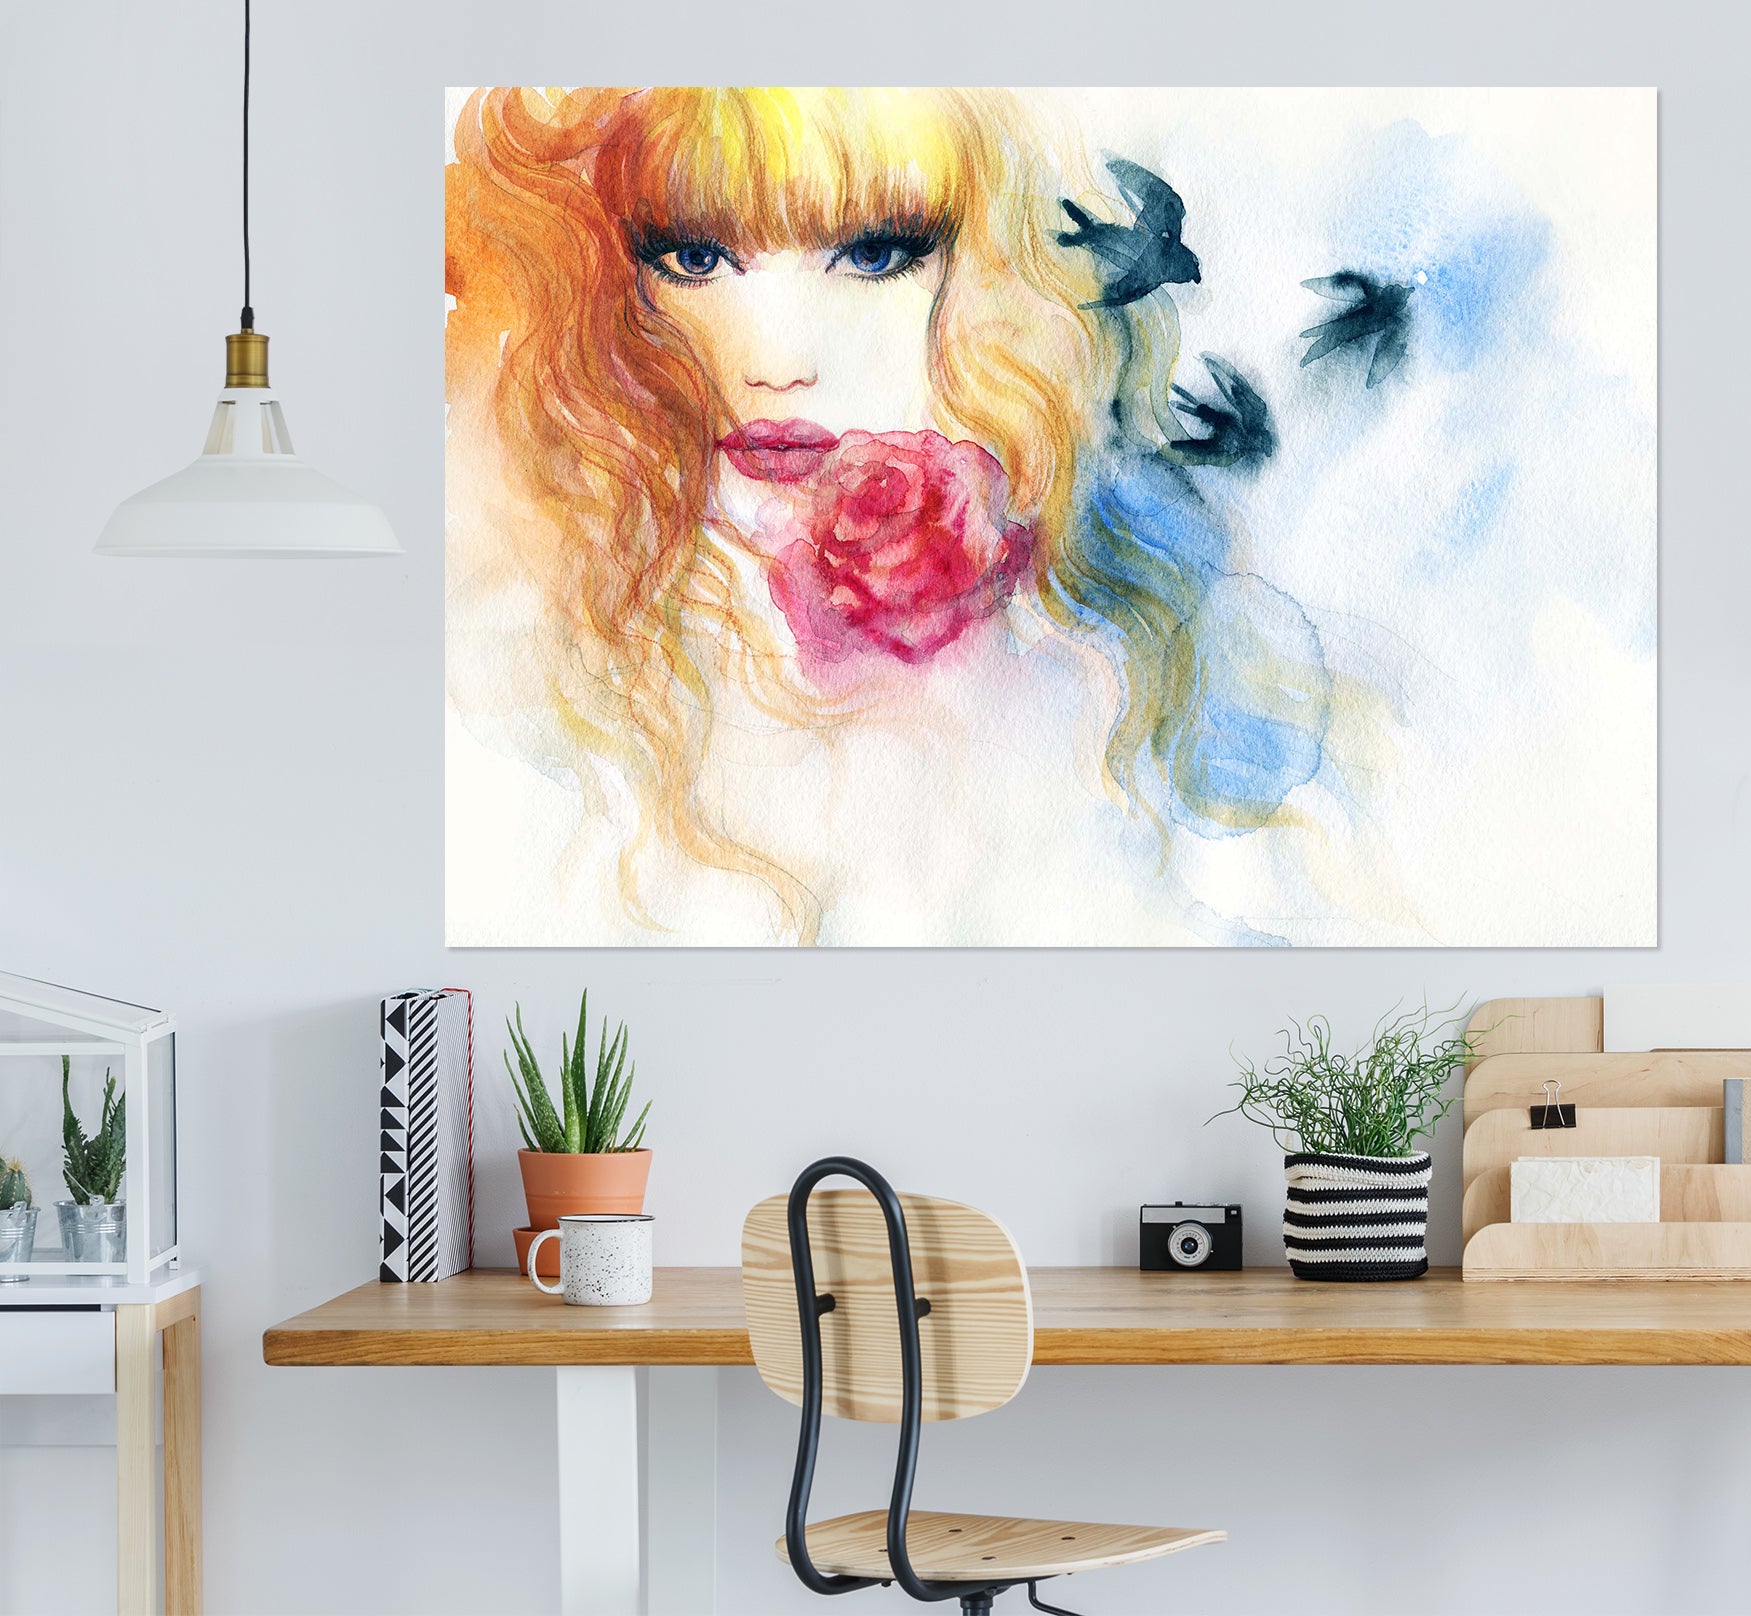 3D Painting Rose Woman 1010 Wall Sticker